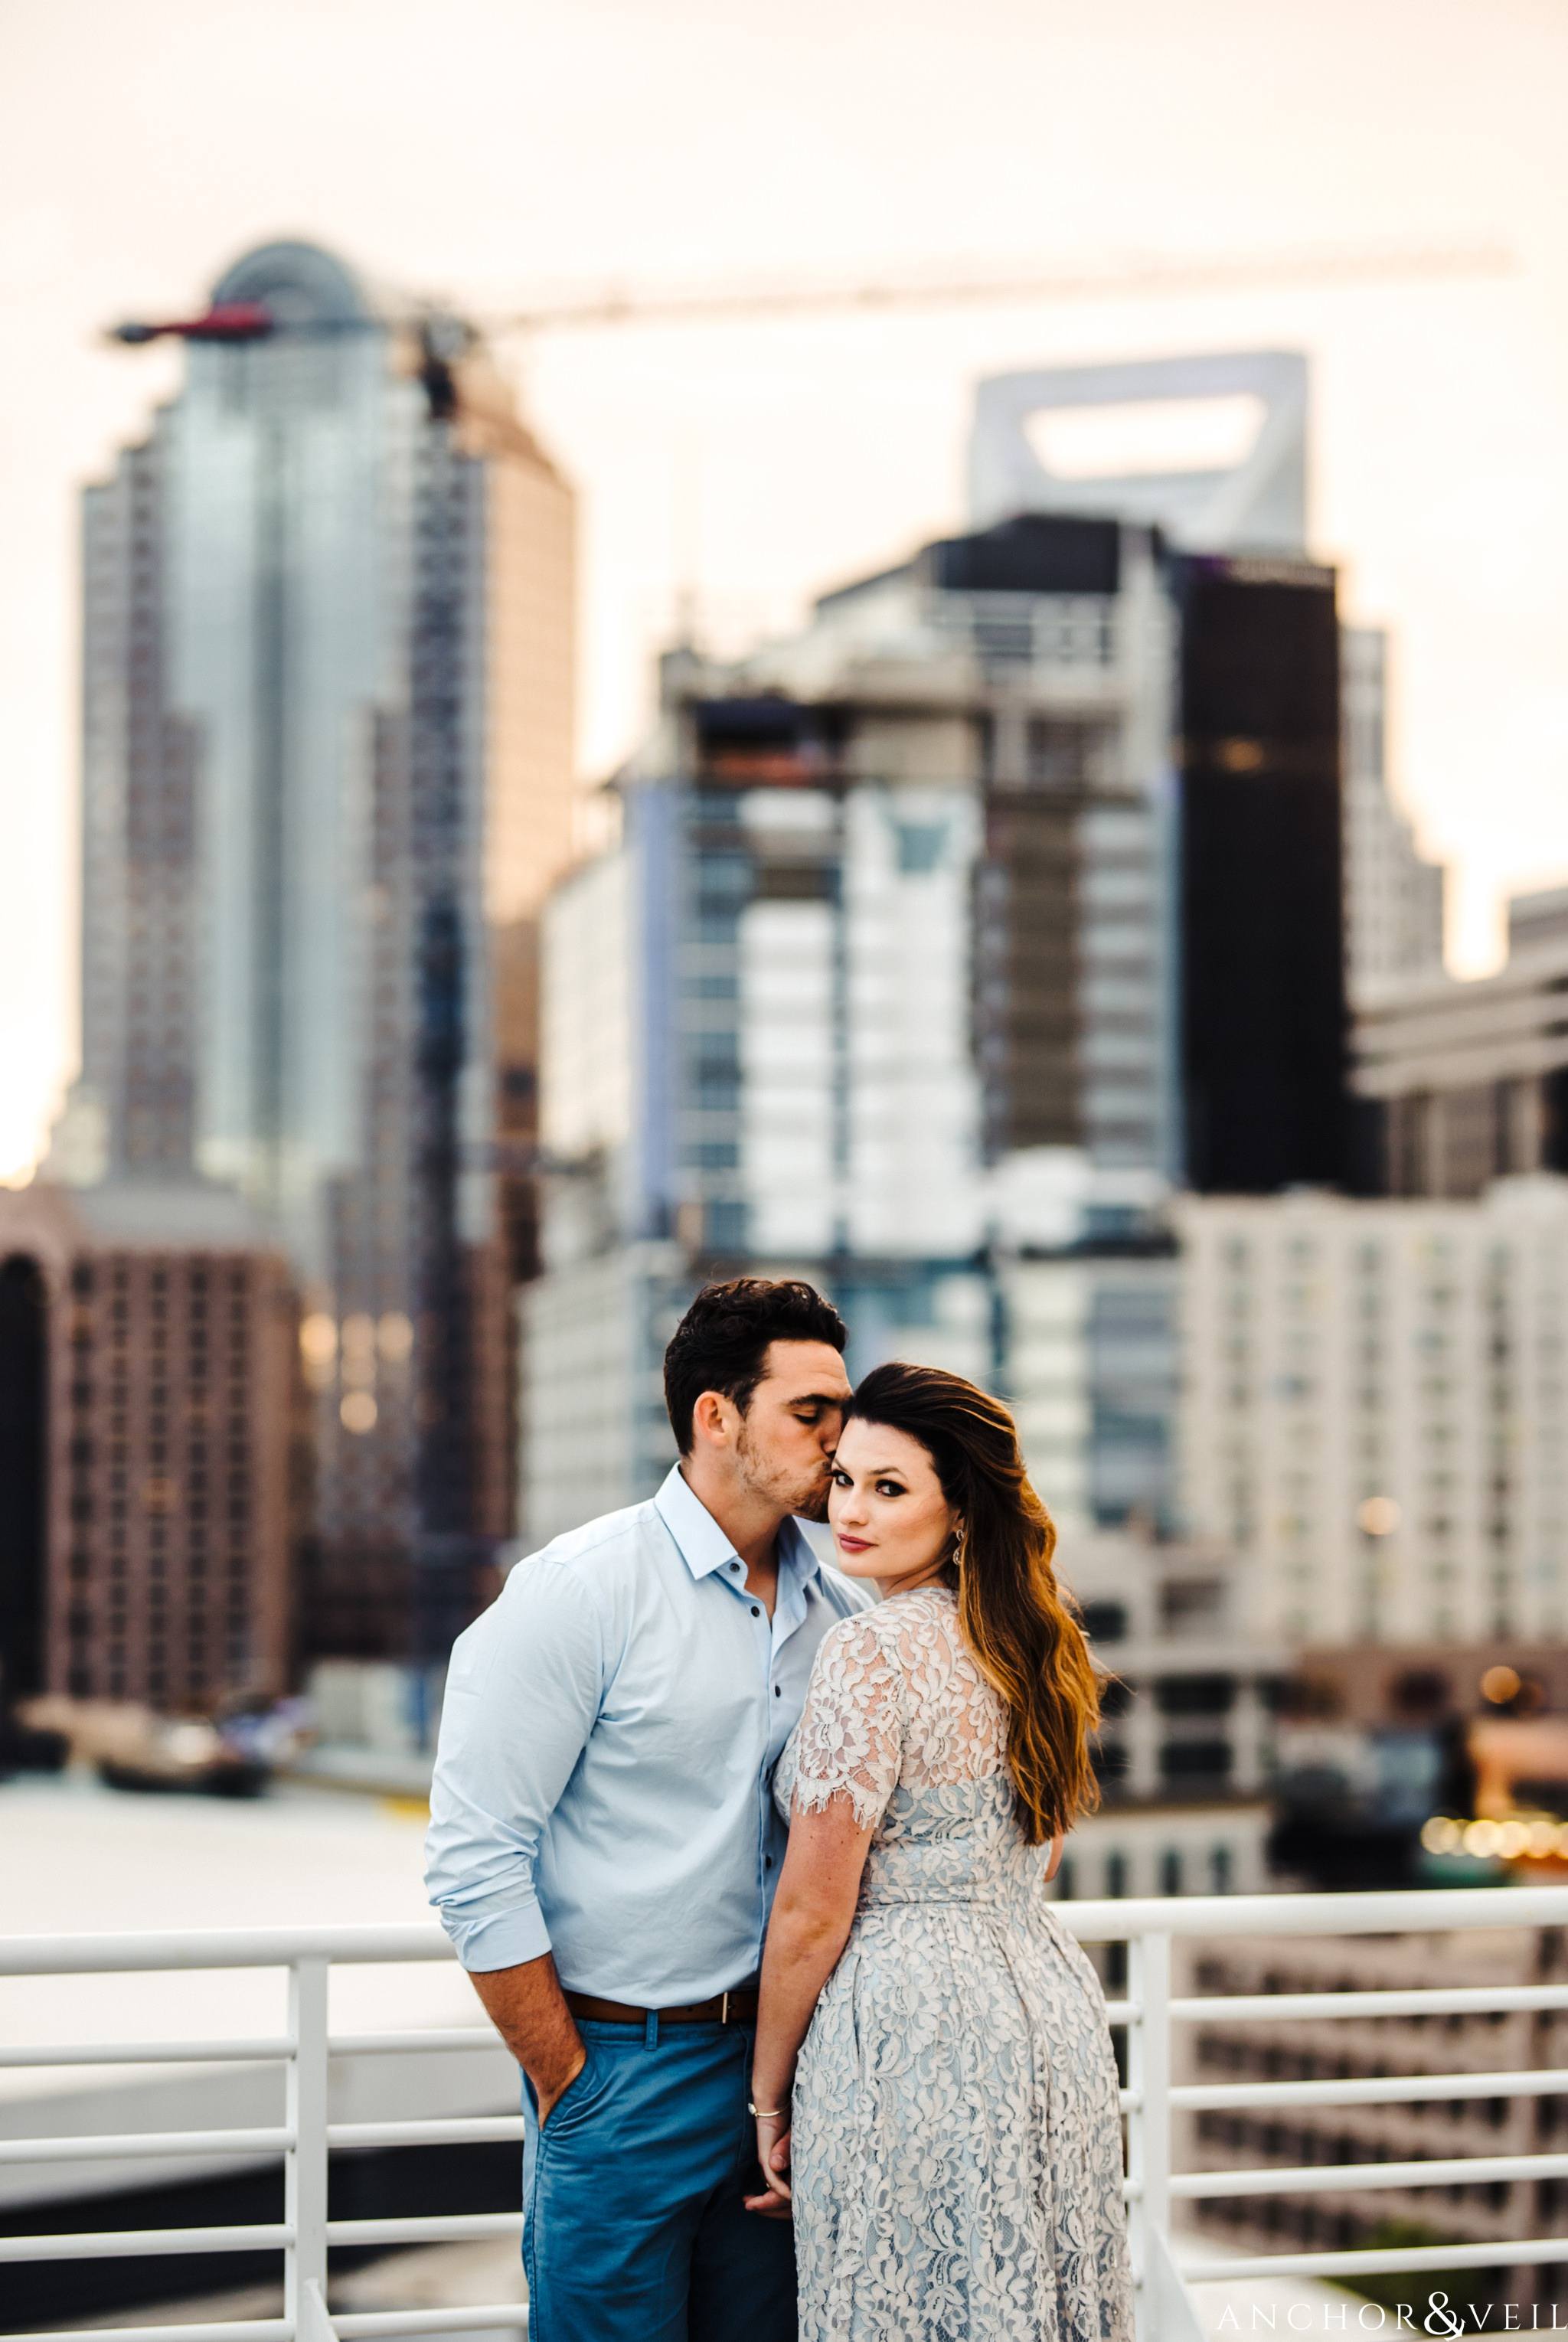 uptown skyline during their Uptown Charlotte NC Engagement Session